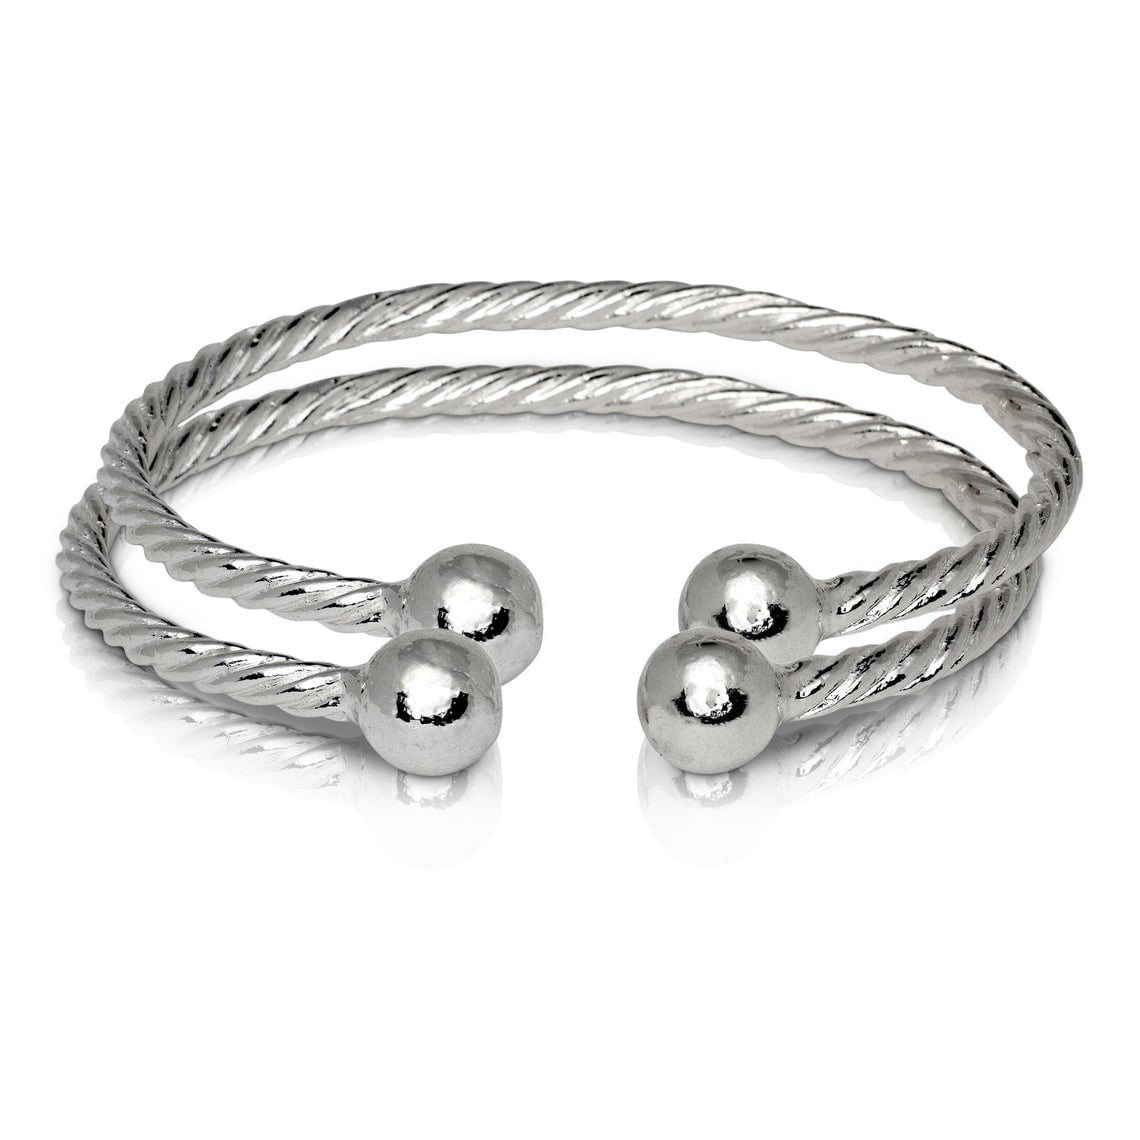 MADE IN USA Fist .925 Sterling Silver West Indian Bangles 